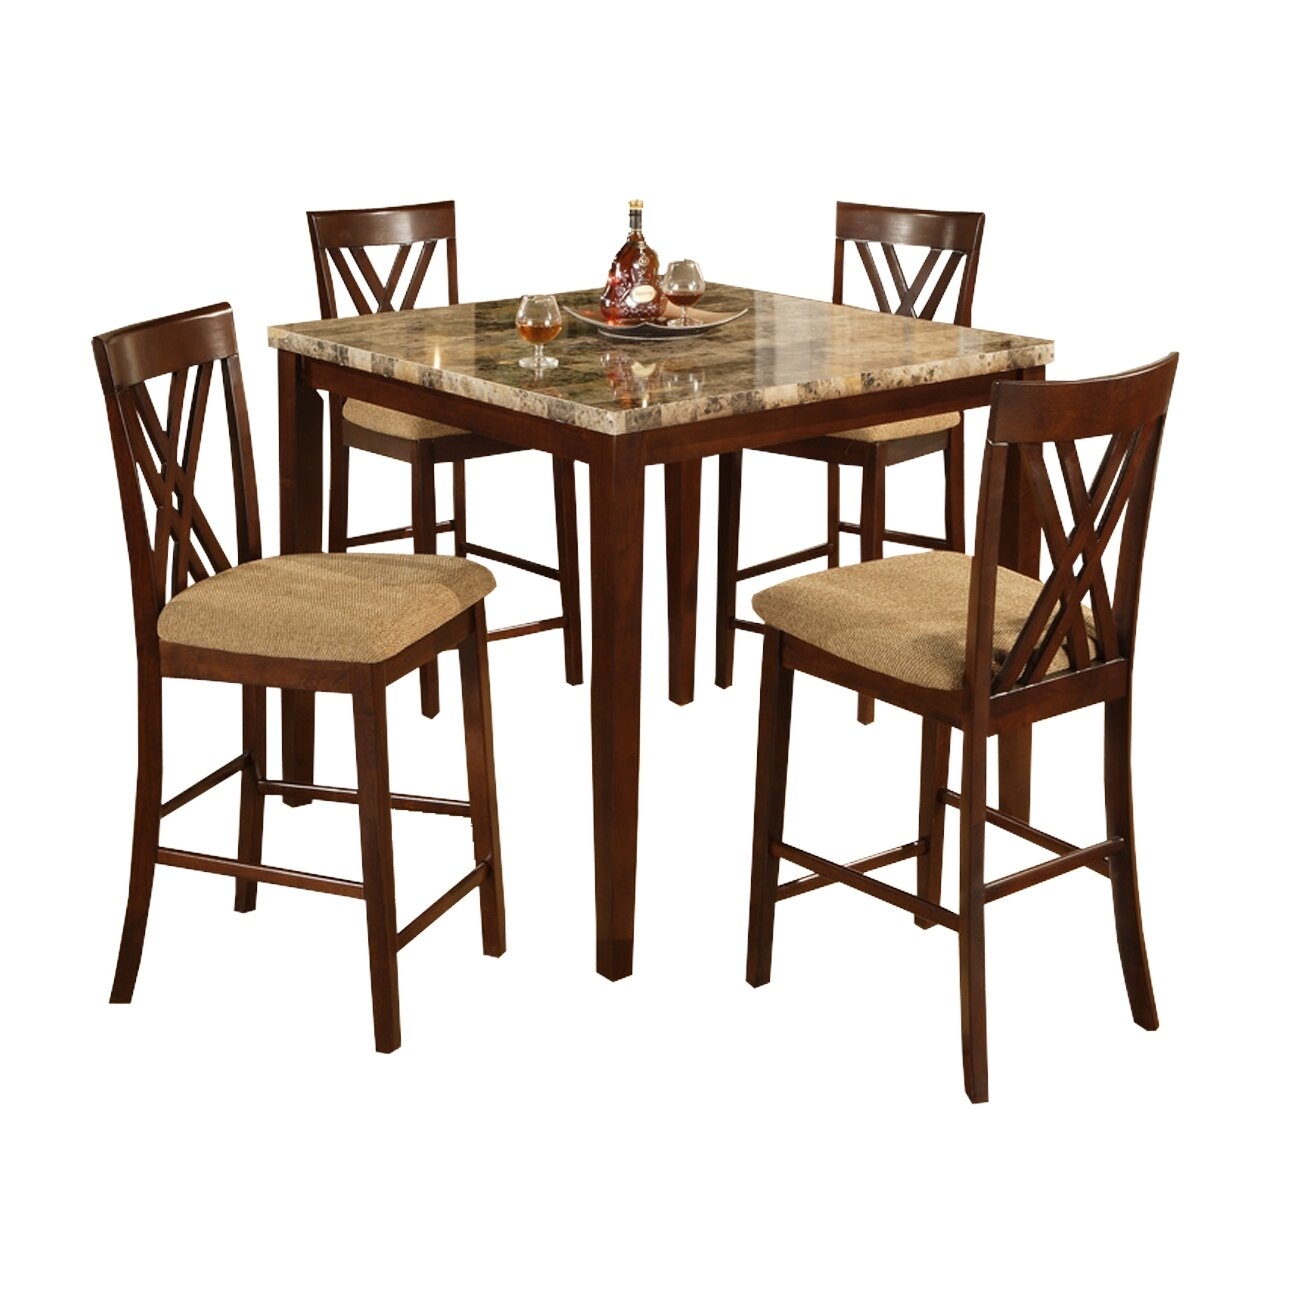 Home Source Industries 11907 Espresso Marble Counter Height Dining Table with 4 Chairs, Brown